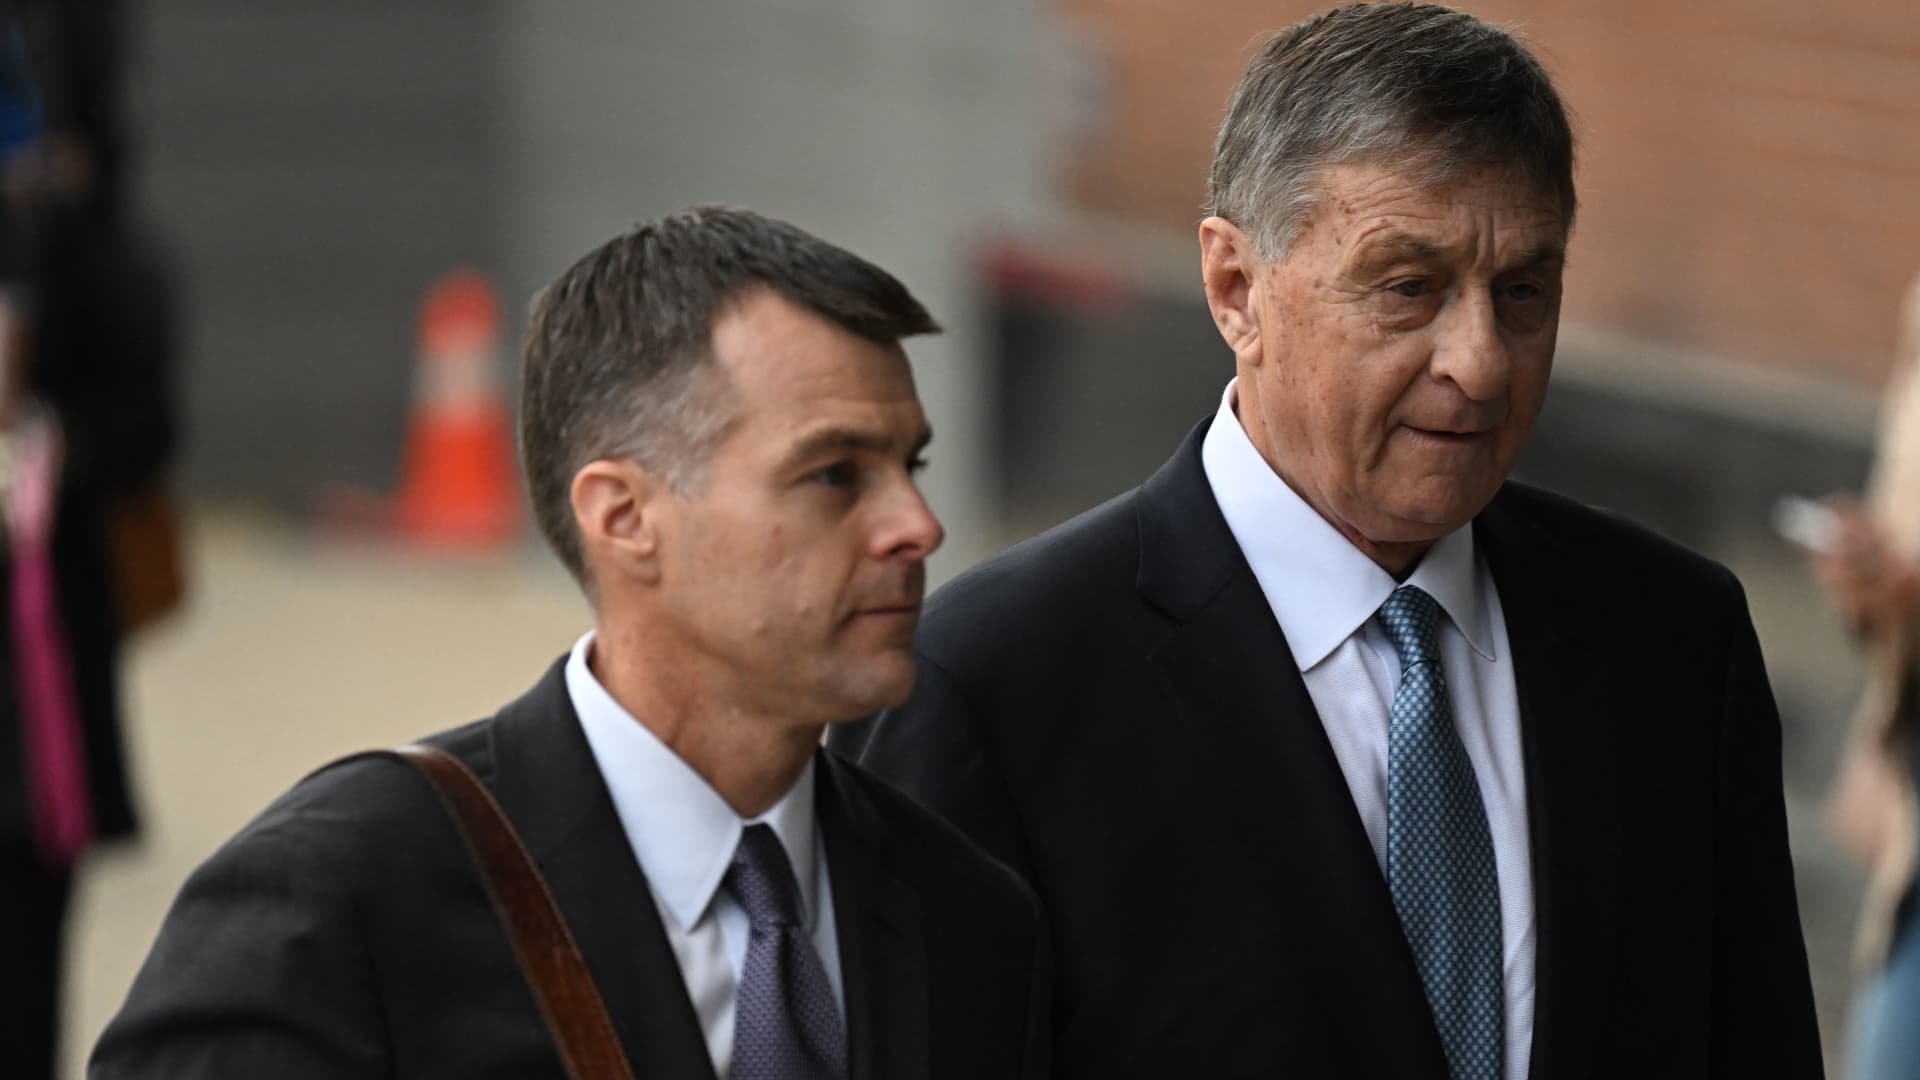 Dominion lawyers Michael Farnan (L) and Rodney Smolla enter the Leonard Williams Justice Center where the Dominion Voting Systems defamation trial against FOX News is taking place on April 18, 2023 in Wilmington, Delaware.